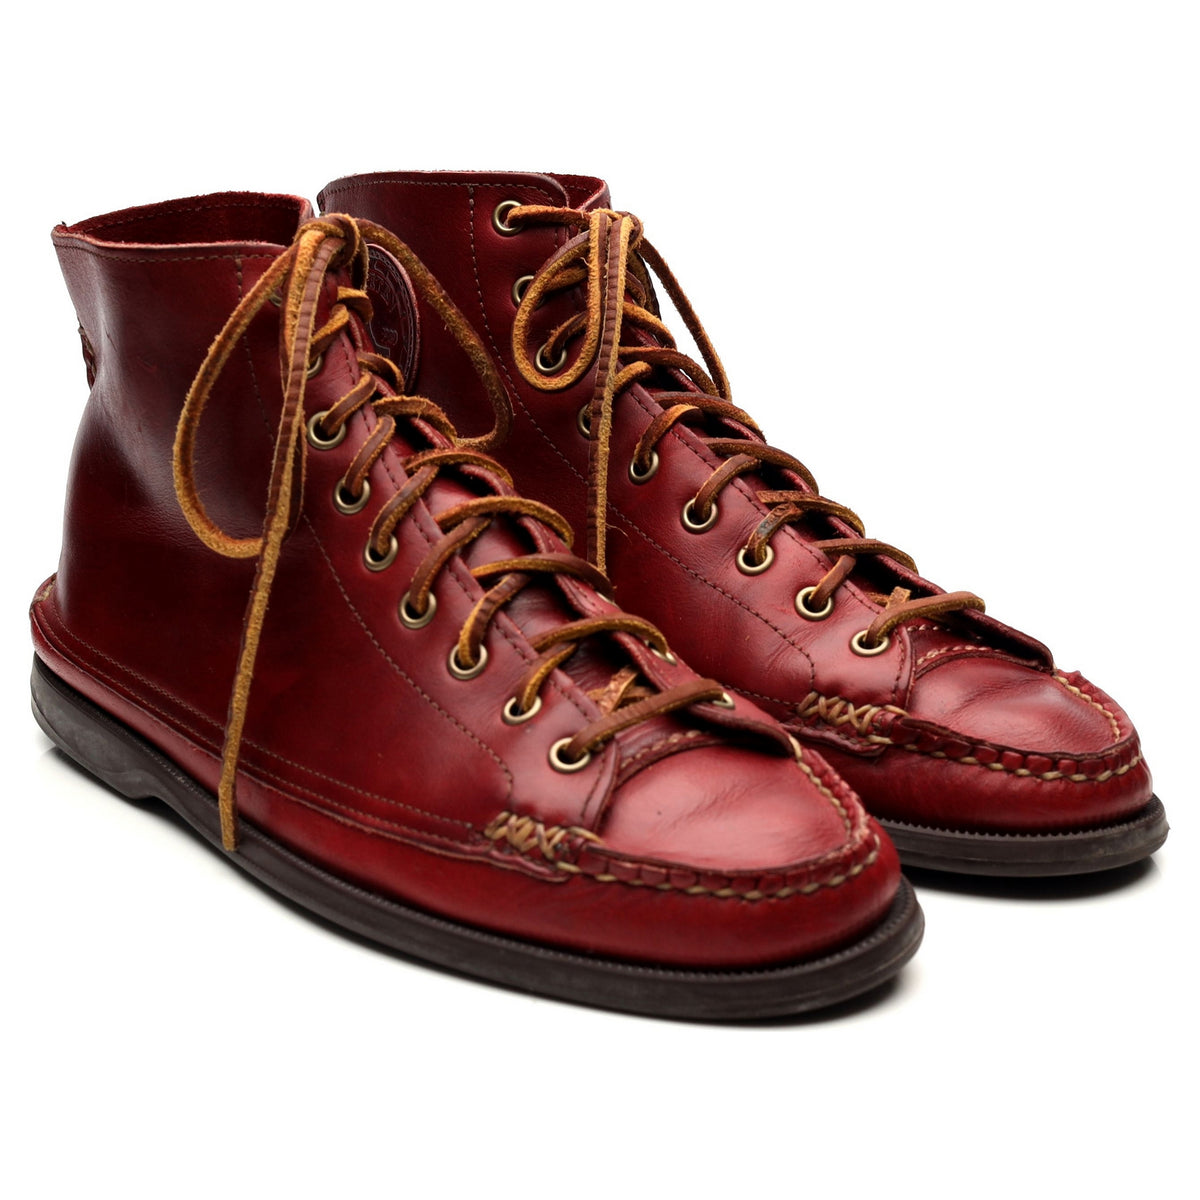 Red Leather Boots UK 8 US 9